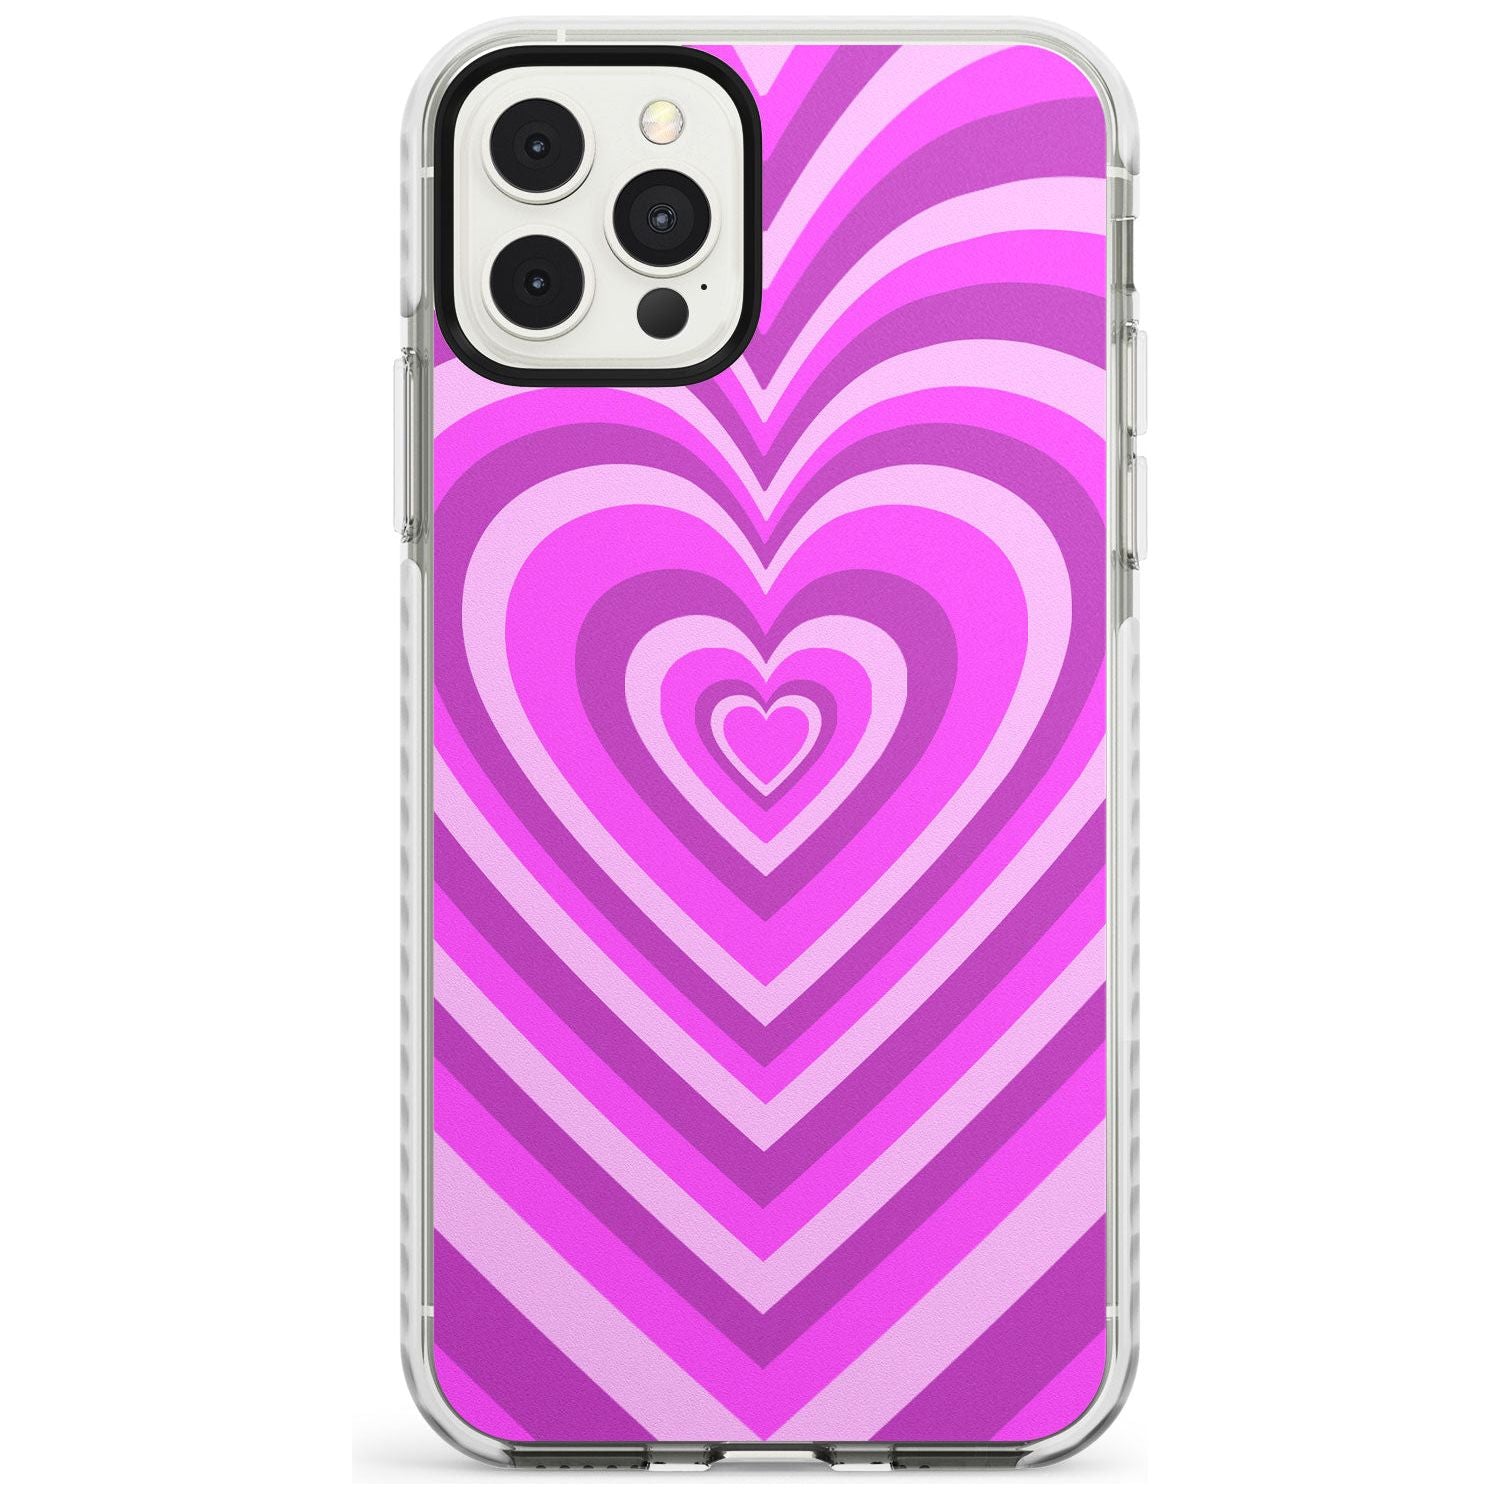 Pink Heart Illusion Impact Phone Case for iPhone 11 Pro Max